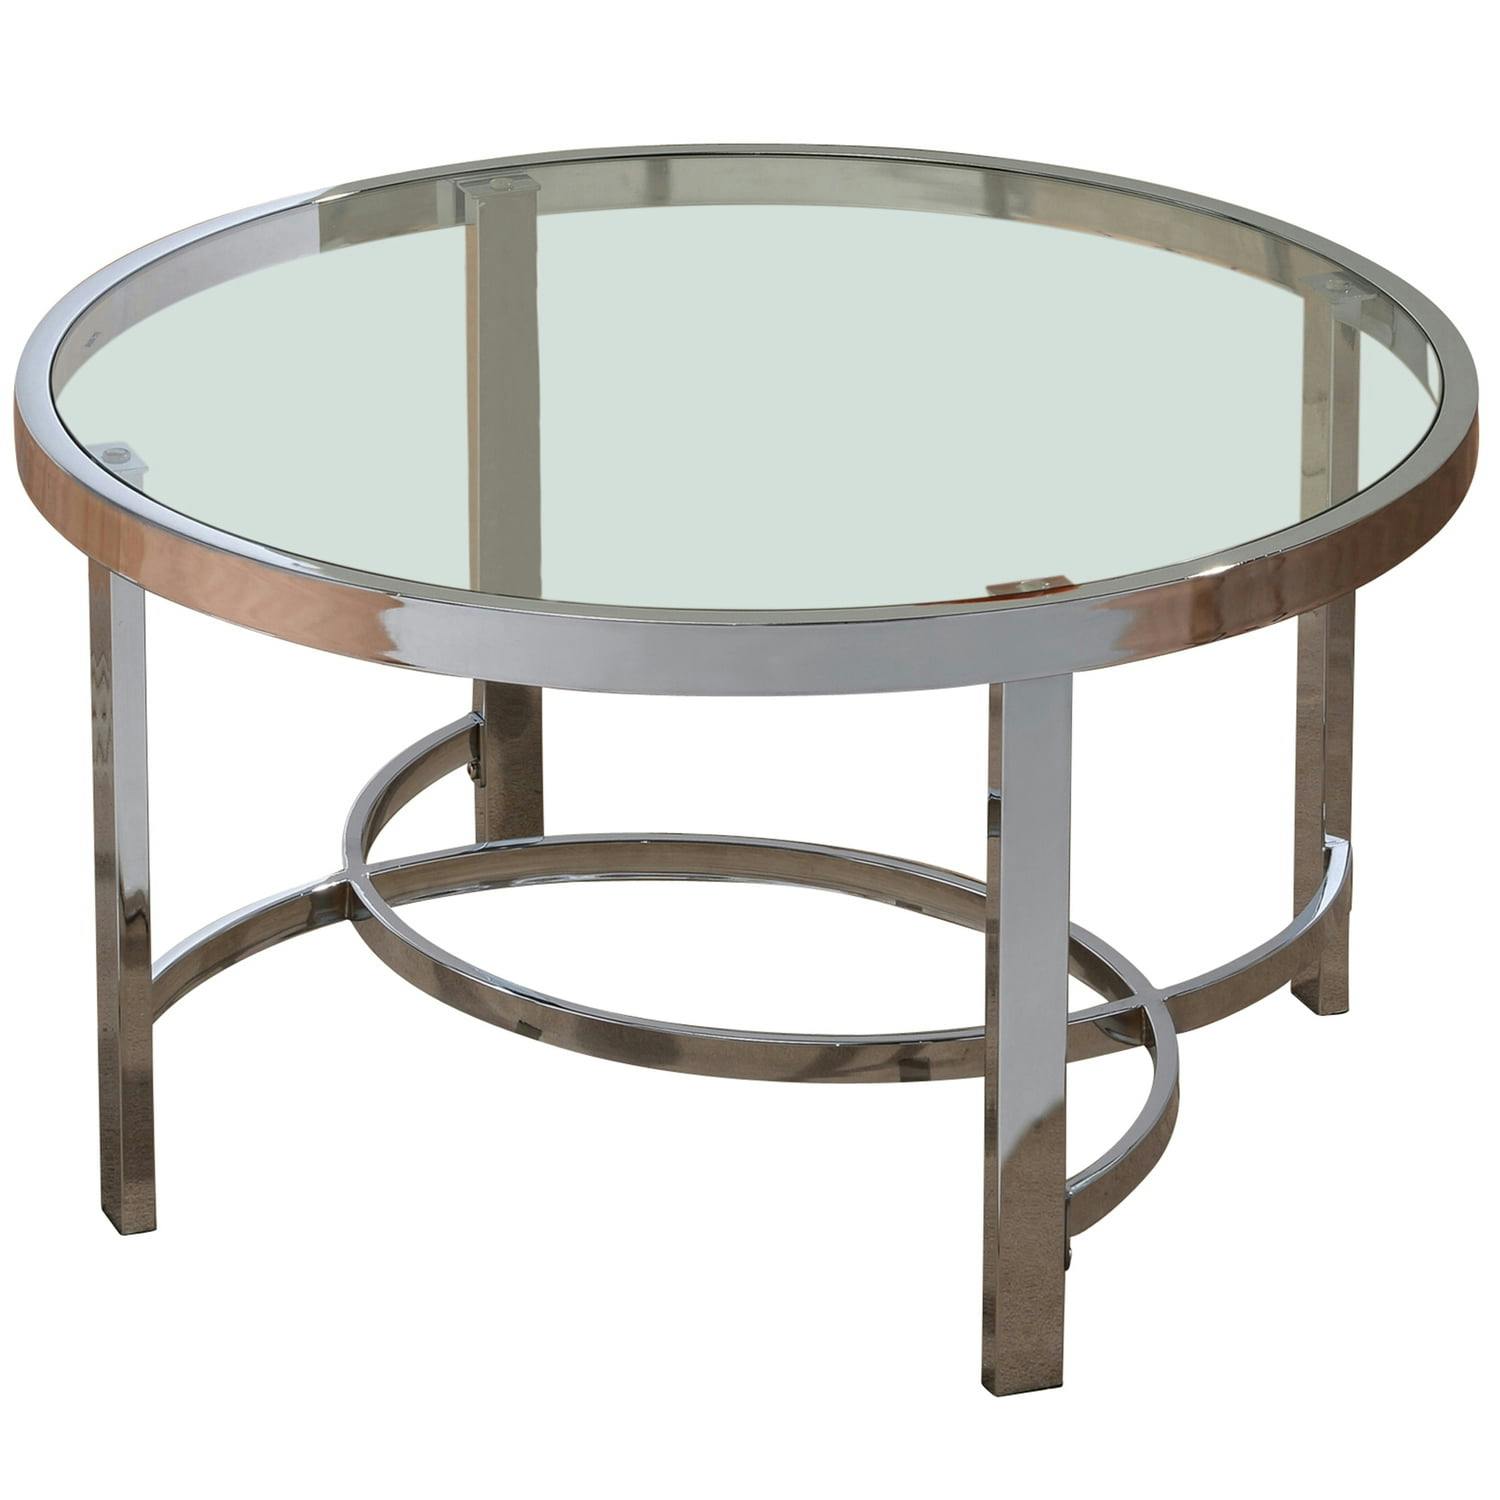 Contemporary Overlapping Chrome & Glass Round Coffee Table